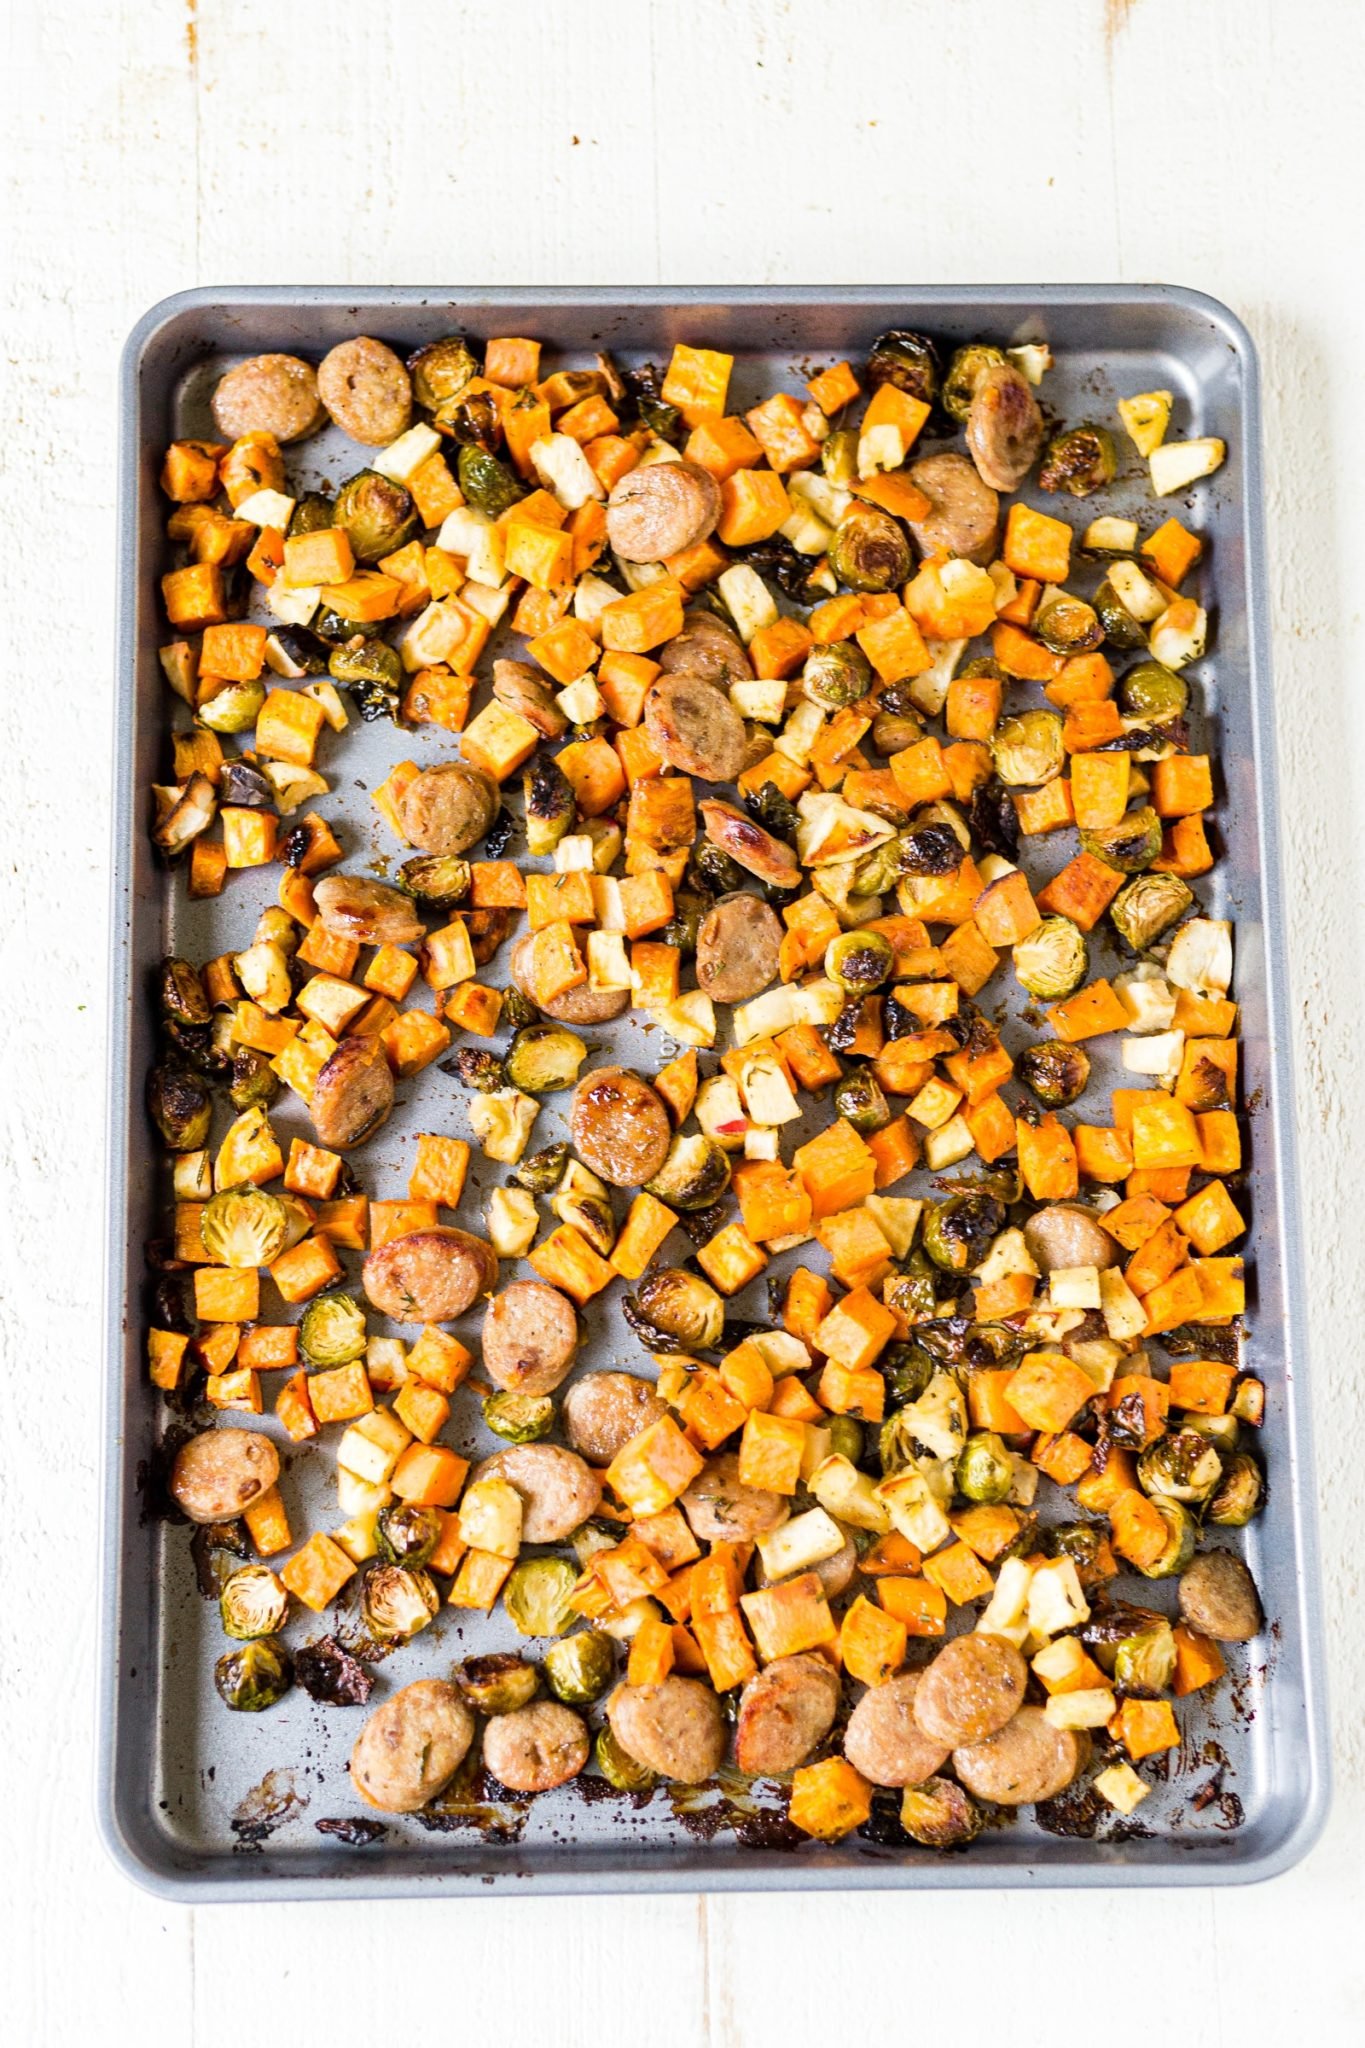 sheet pan filled with roasted sweet potatoes, apples, brussels sprouts and chicken sausage